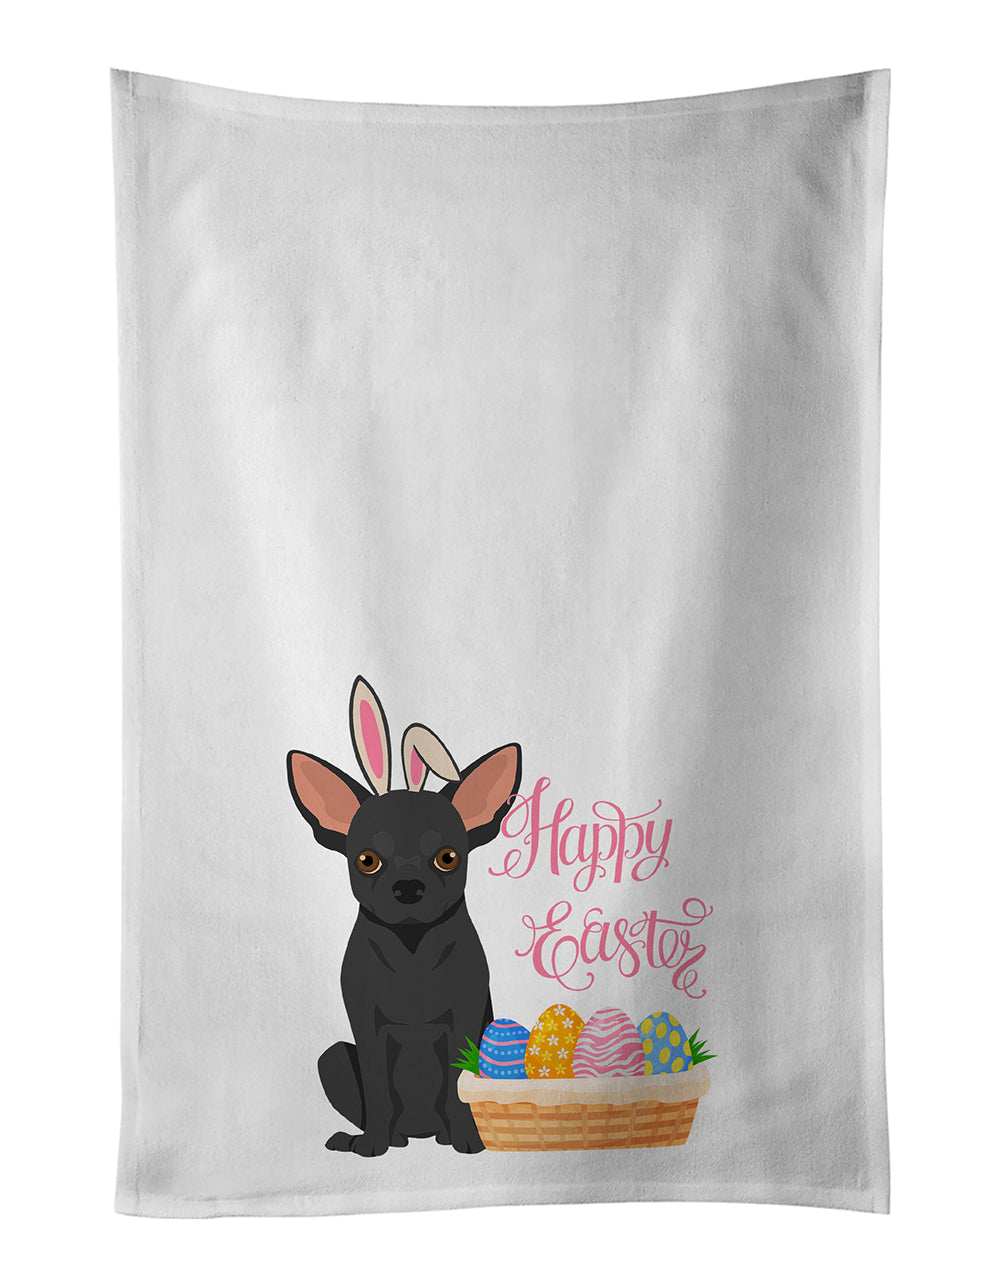 Buy this Black Chihuahua Easter White Kitchen Towel Set of 2 Dish Towels